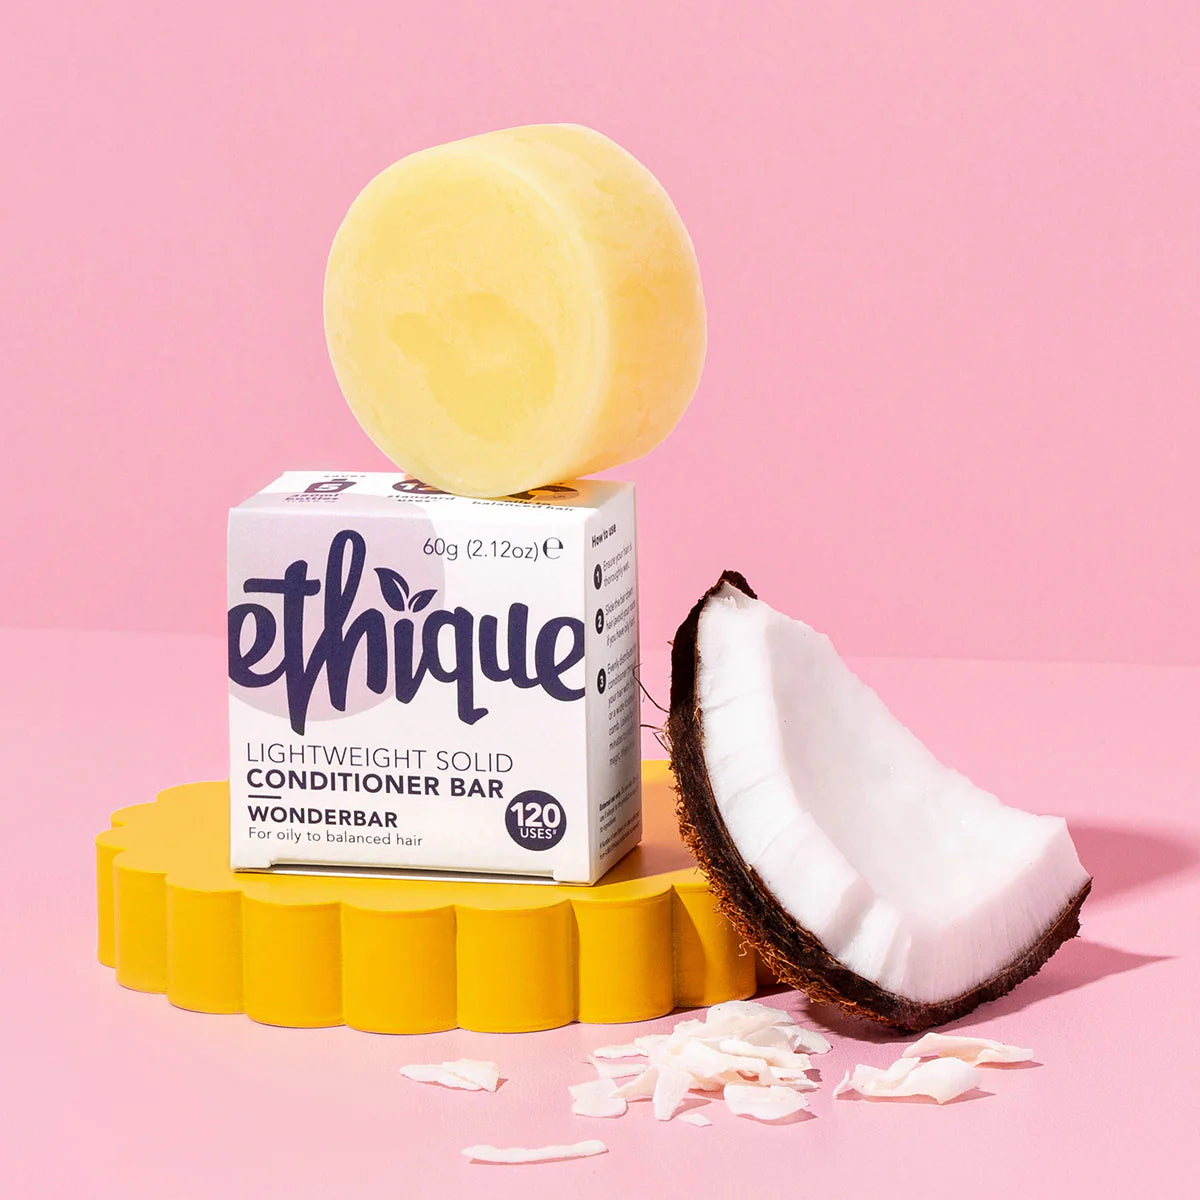 Ethique Solid Conditioner Wonderbar Bar for Balanced to oily hair (60g)